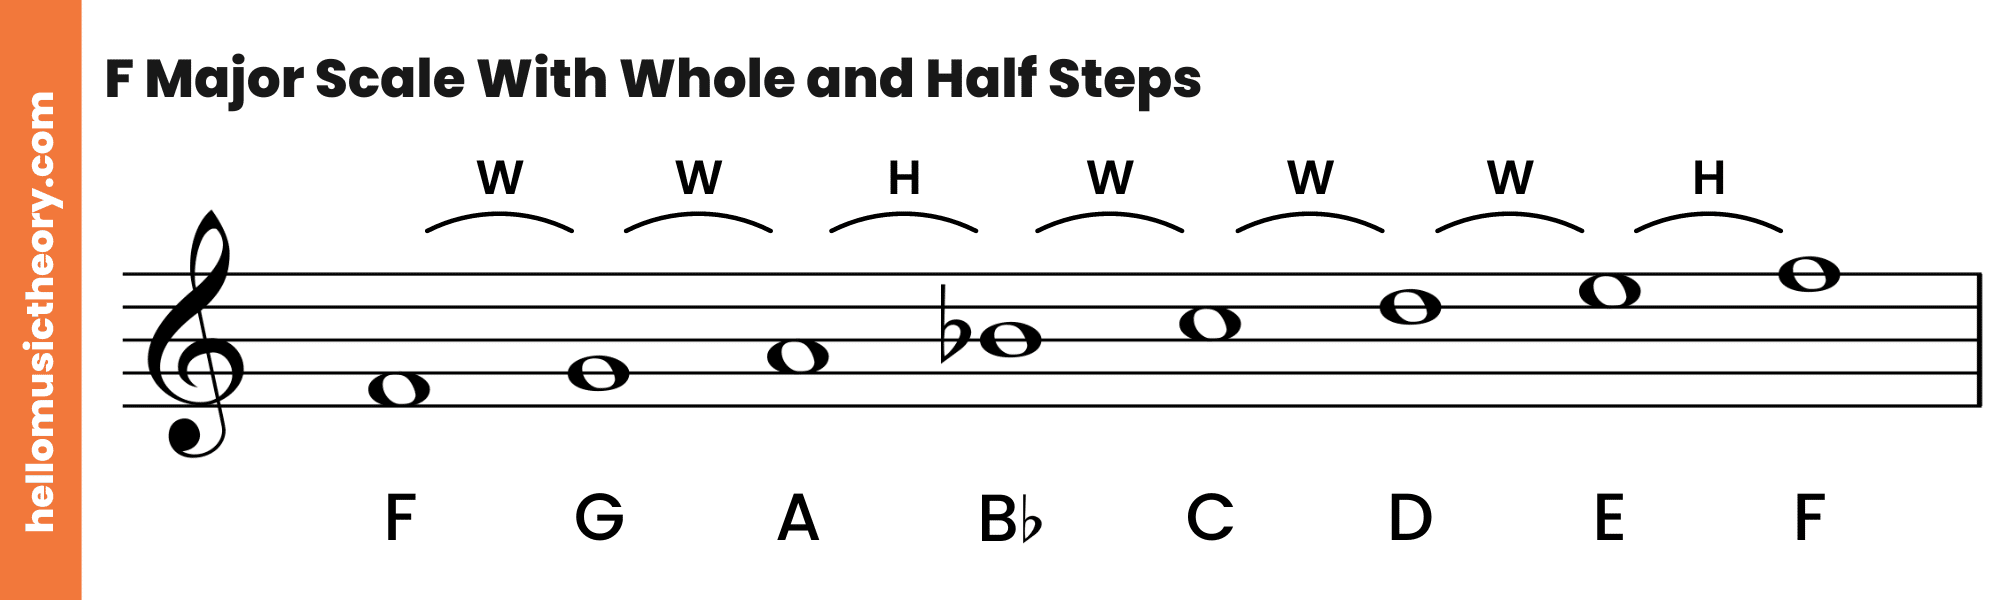 F Major Scale Treble Clef With Whole and Half Steps